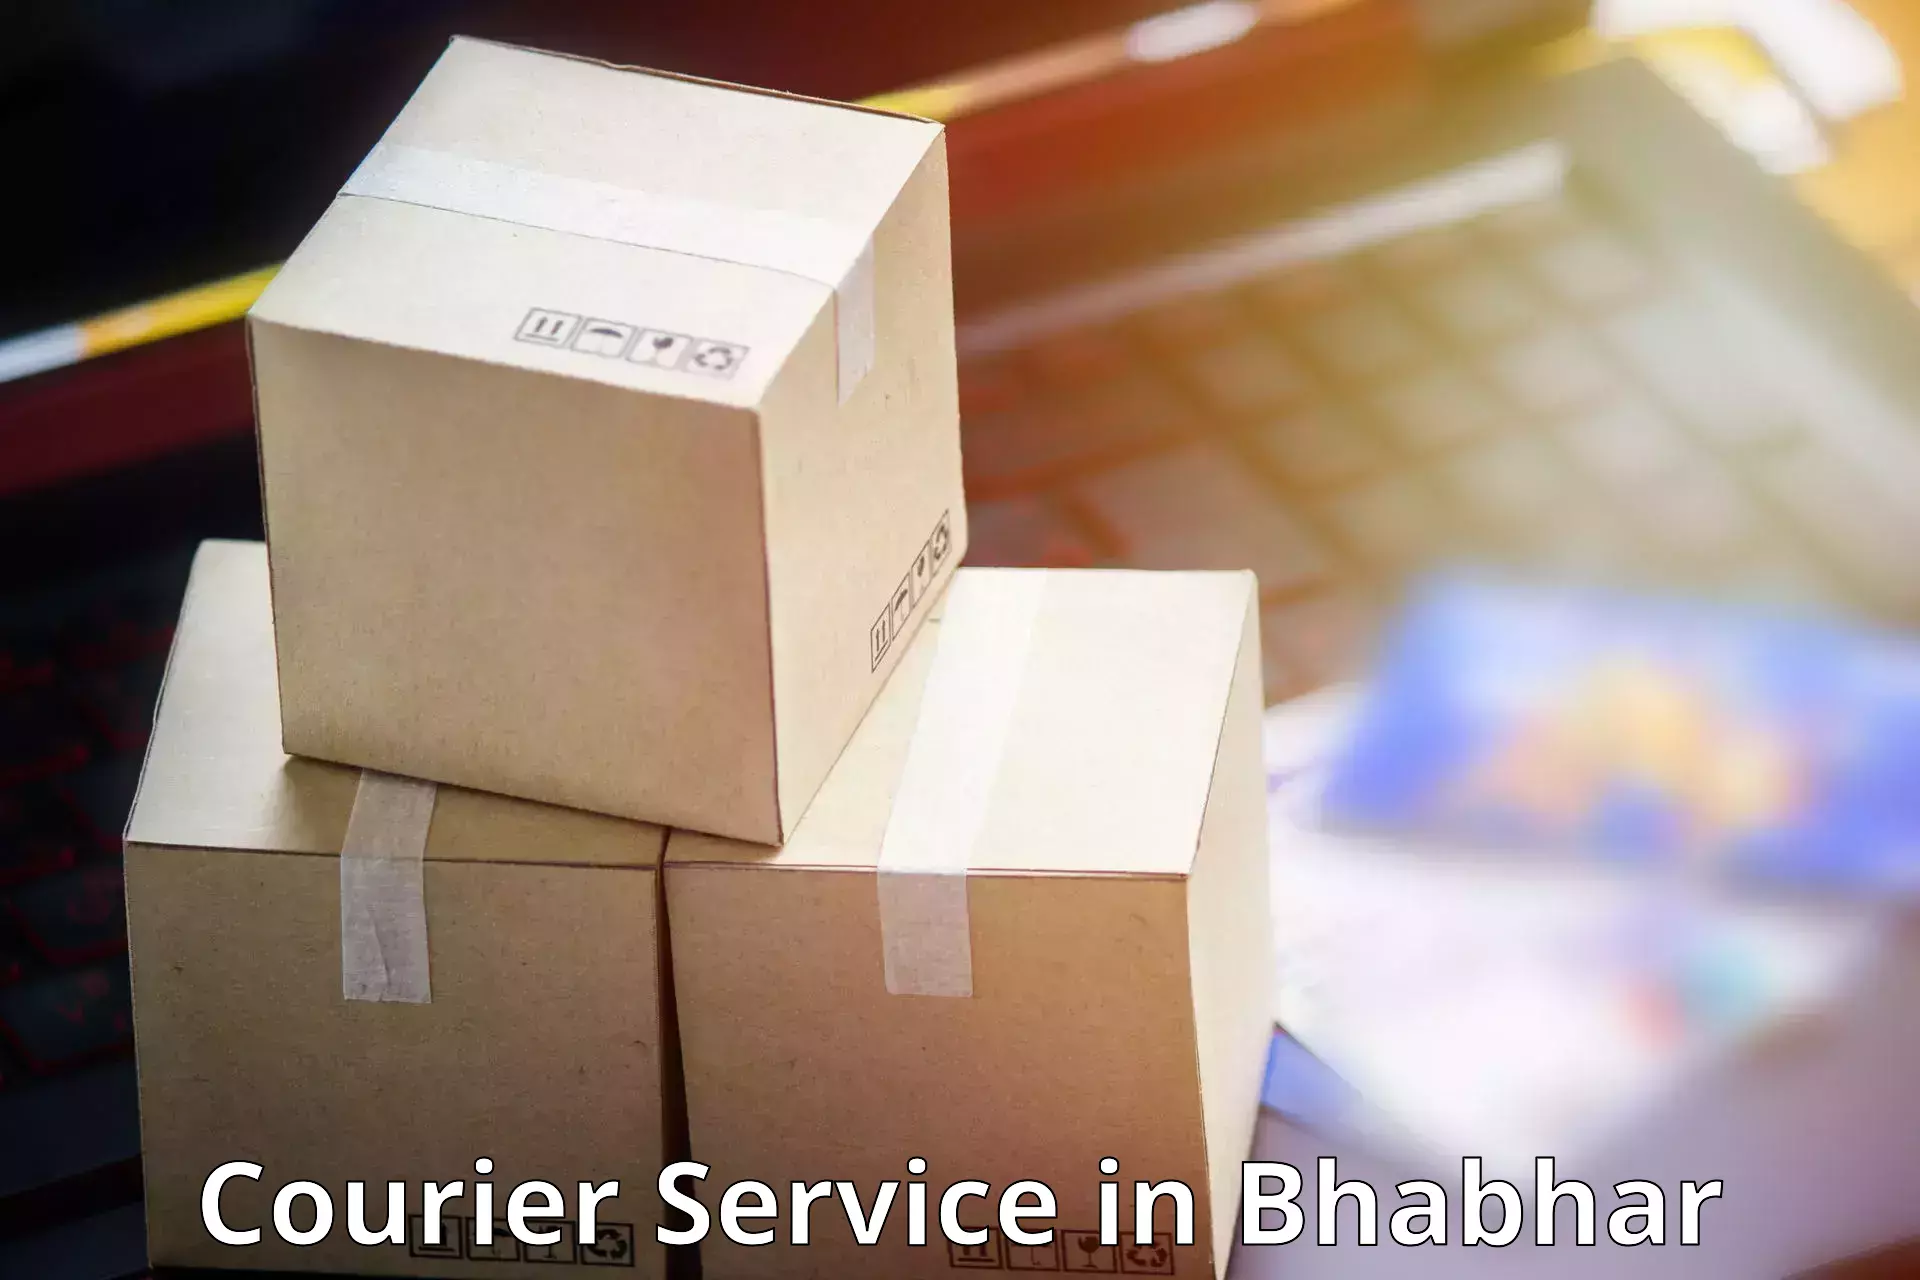 Discounted shipping in Bhabhar